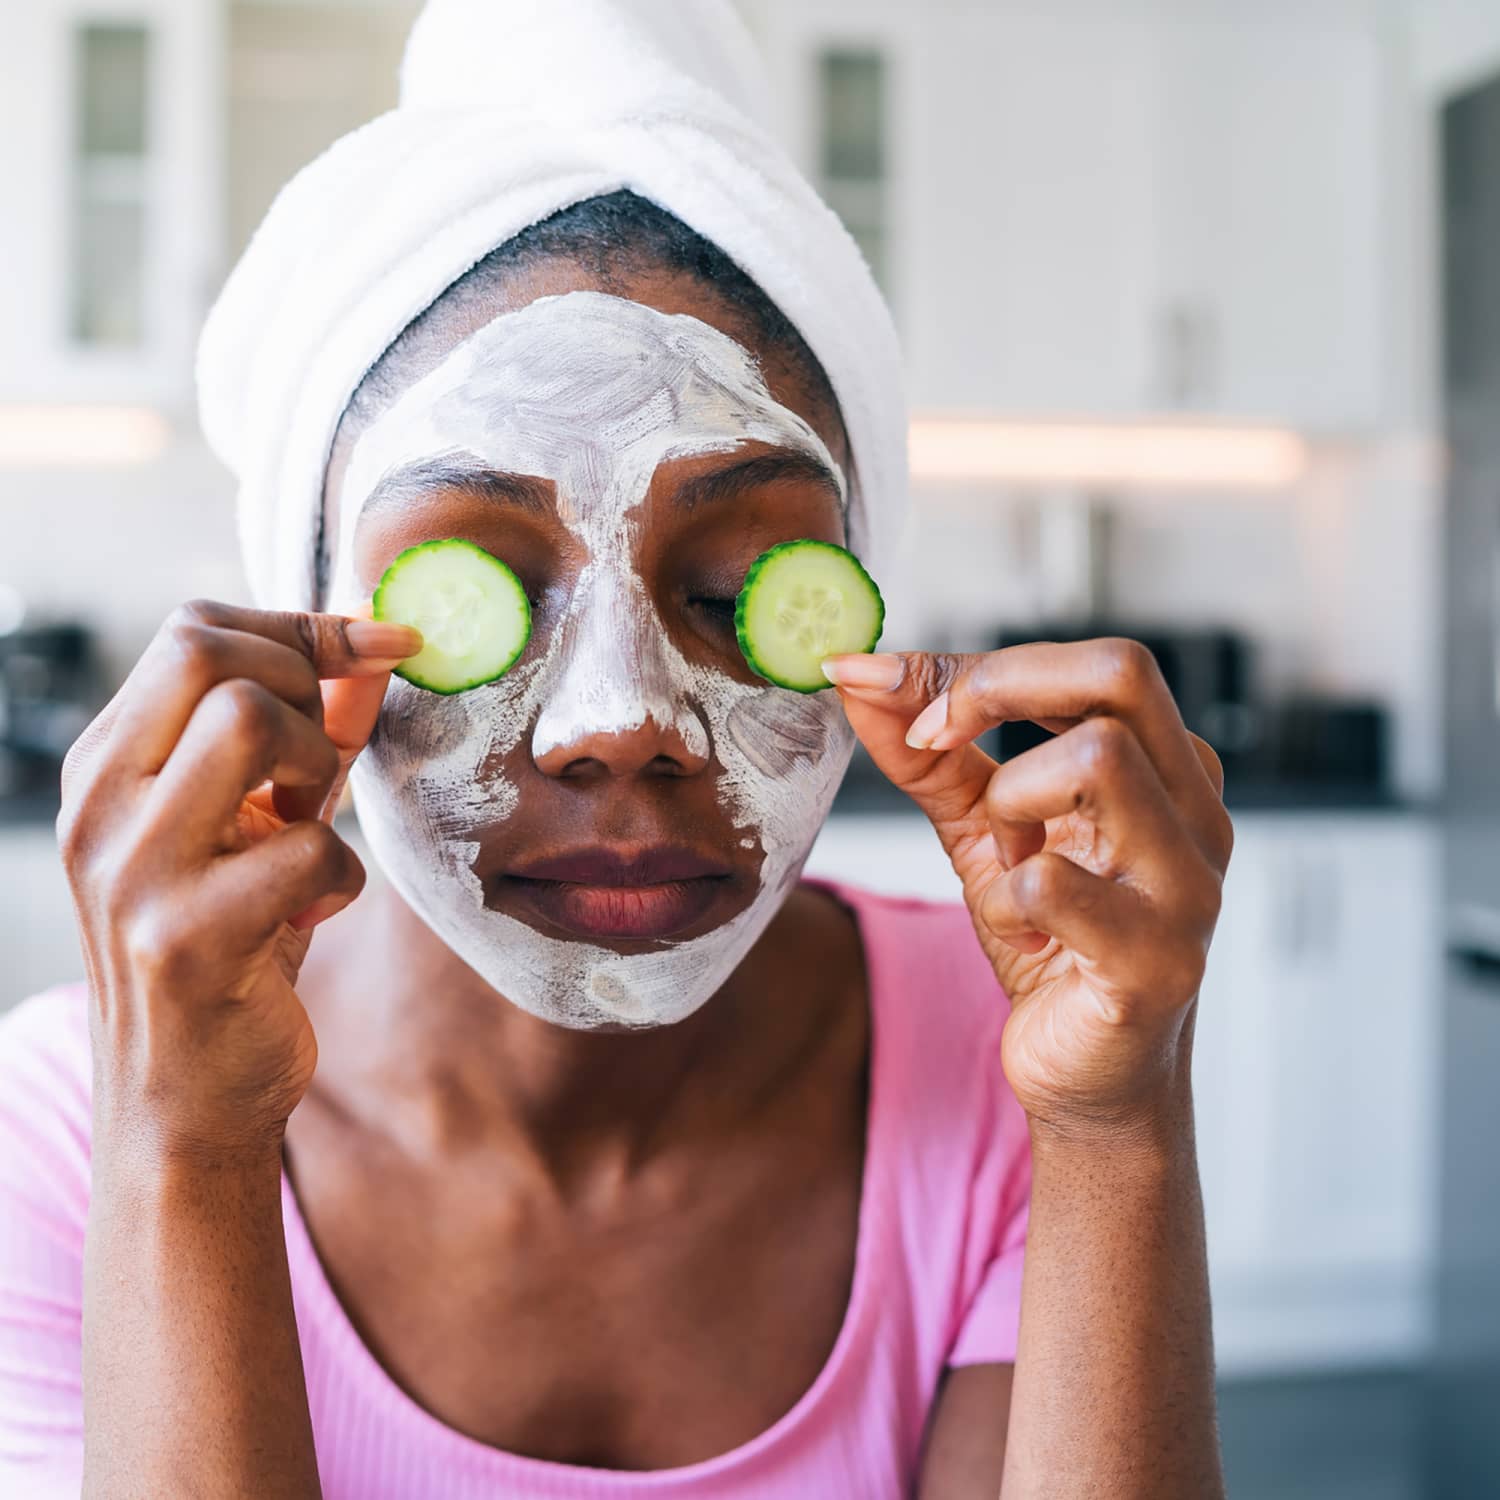 11 Face Masks That'll Keep You Warm This Winter